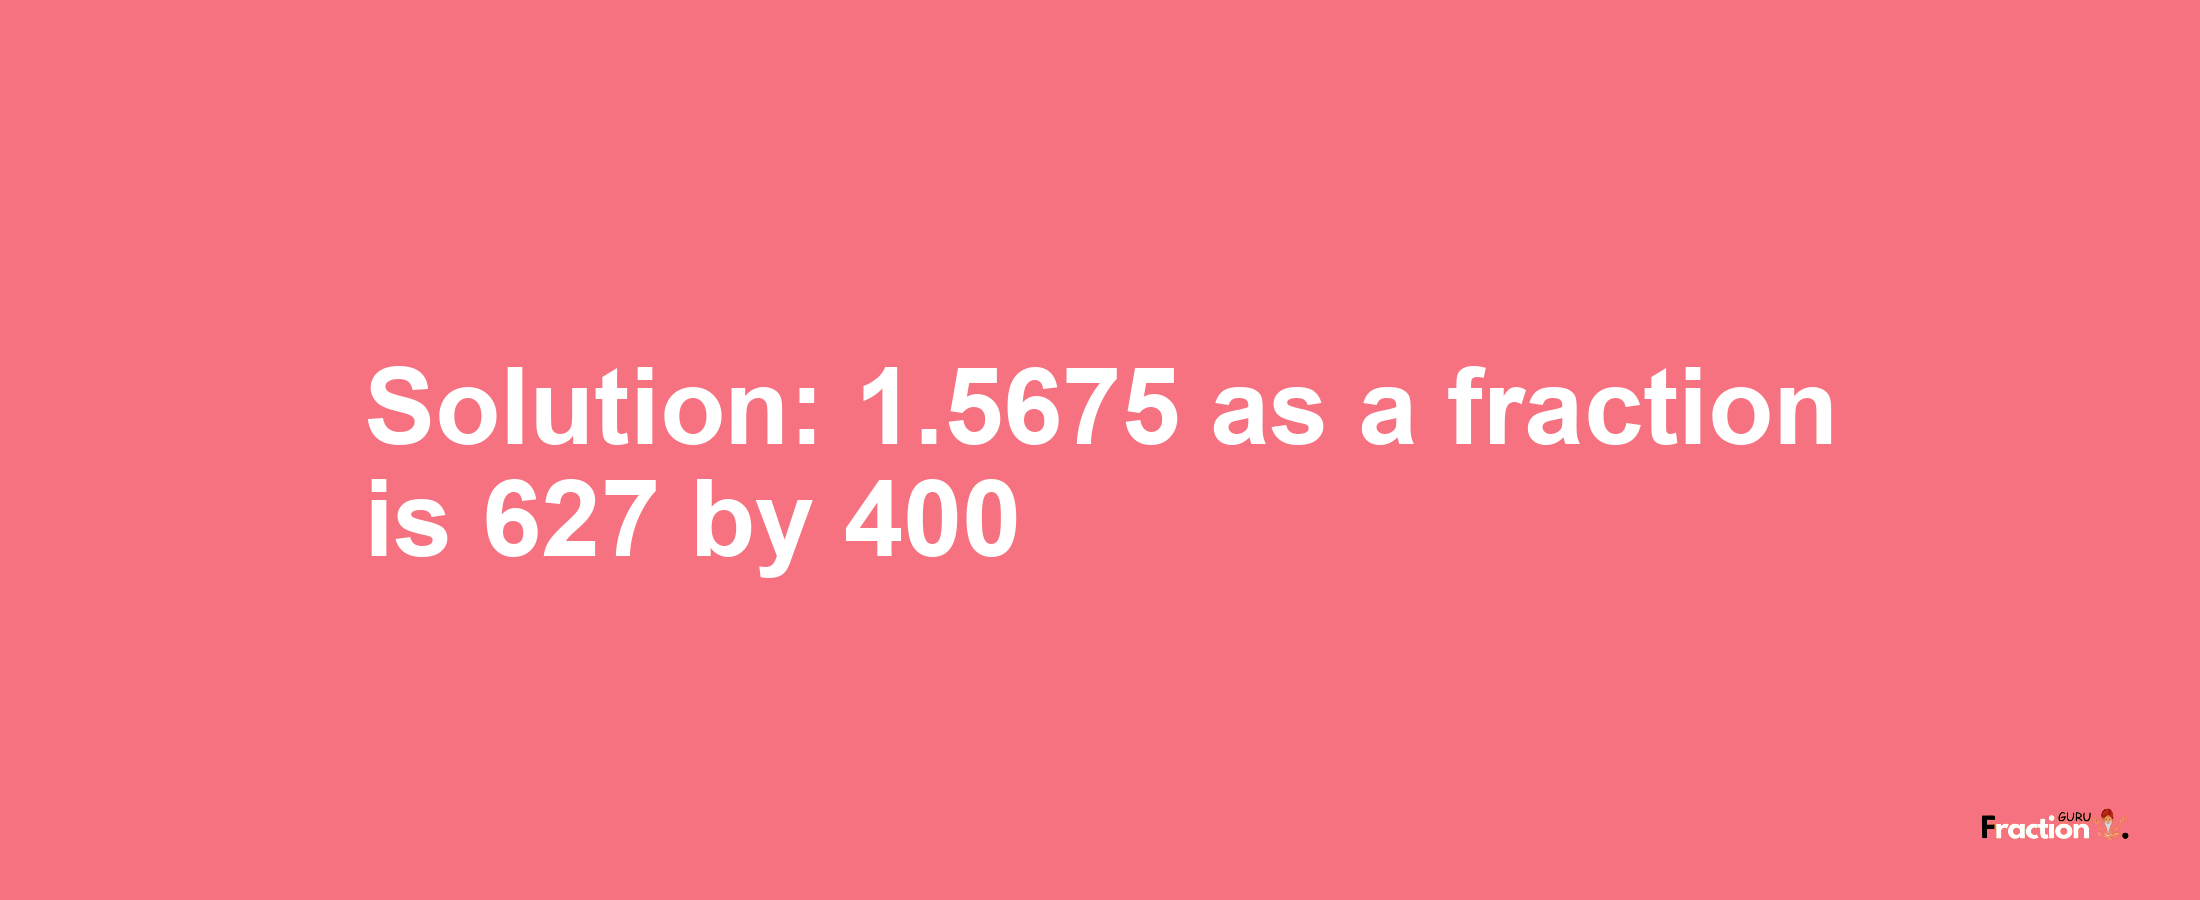 Solution:1.5675 as a fraction is 627/400